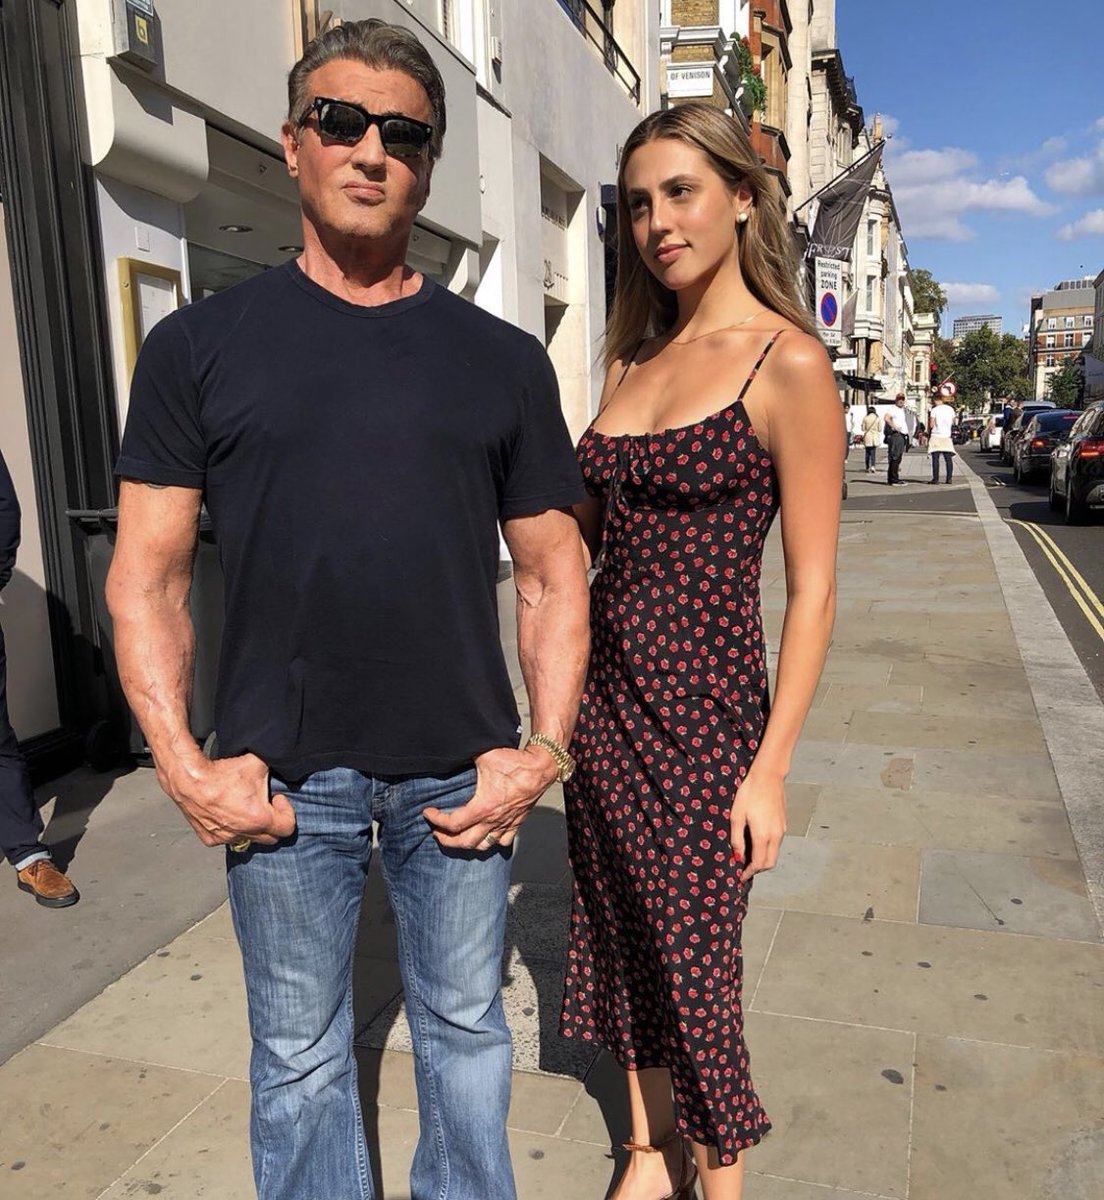 In London with my daughter @sophiastallone … Getting ready to return and do a great deal of #RAMBO publicity.